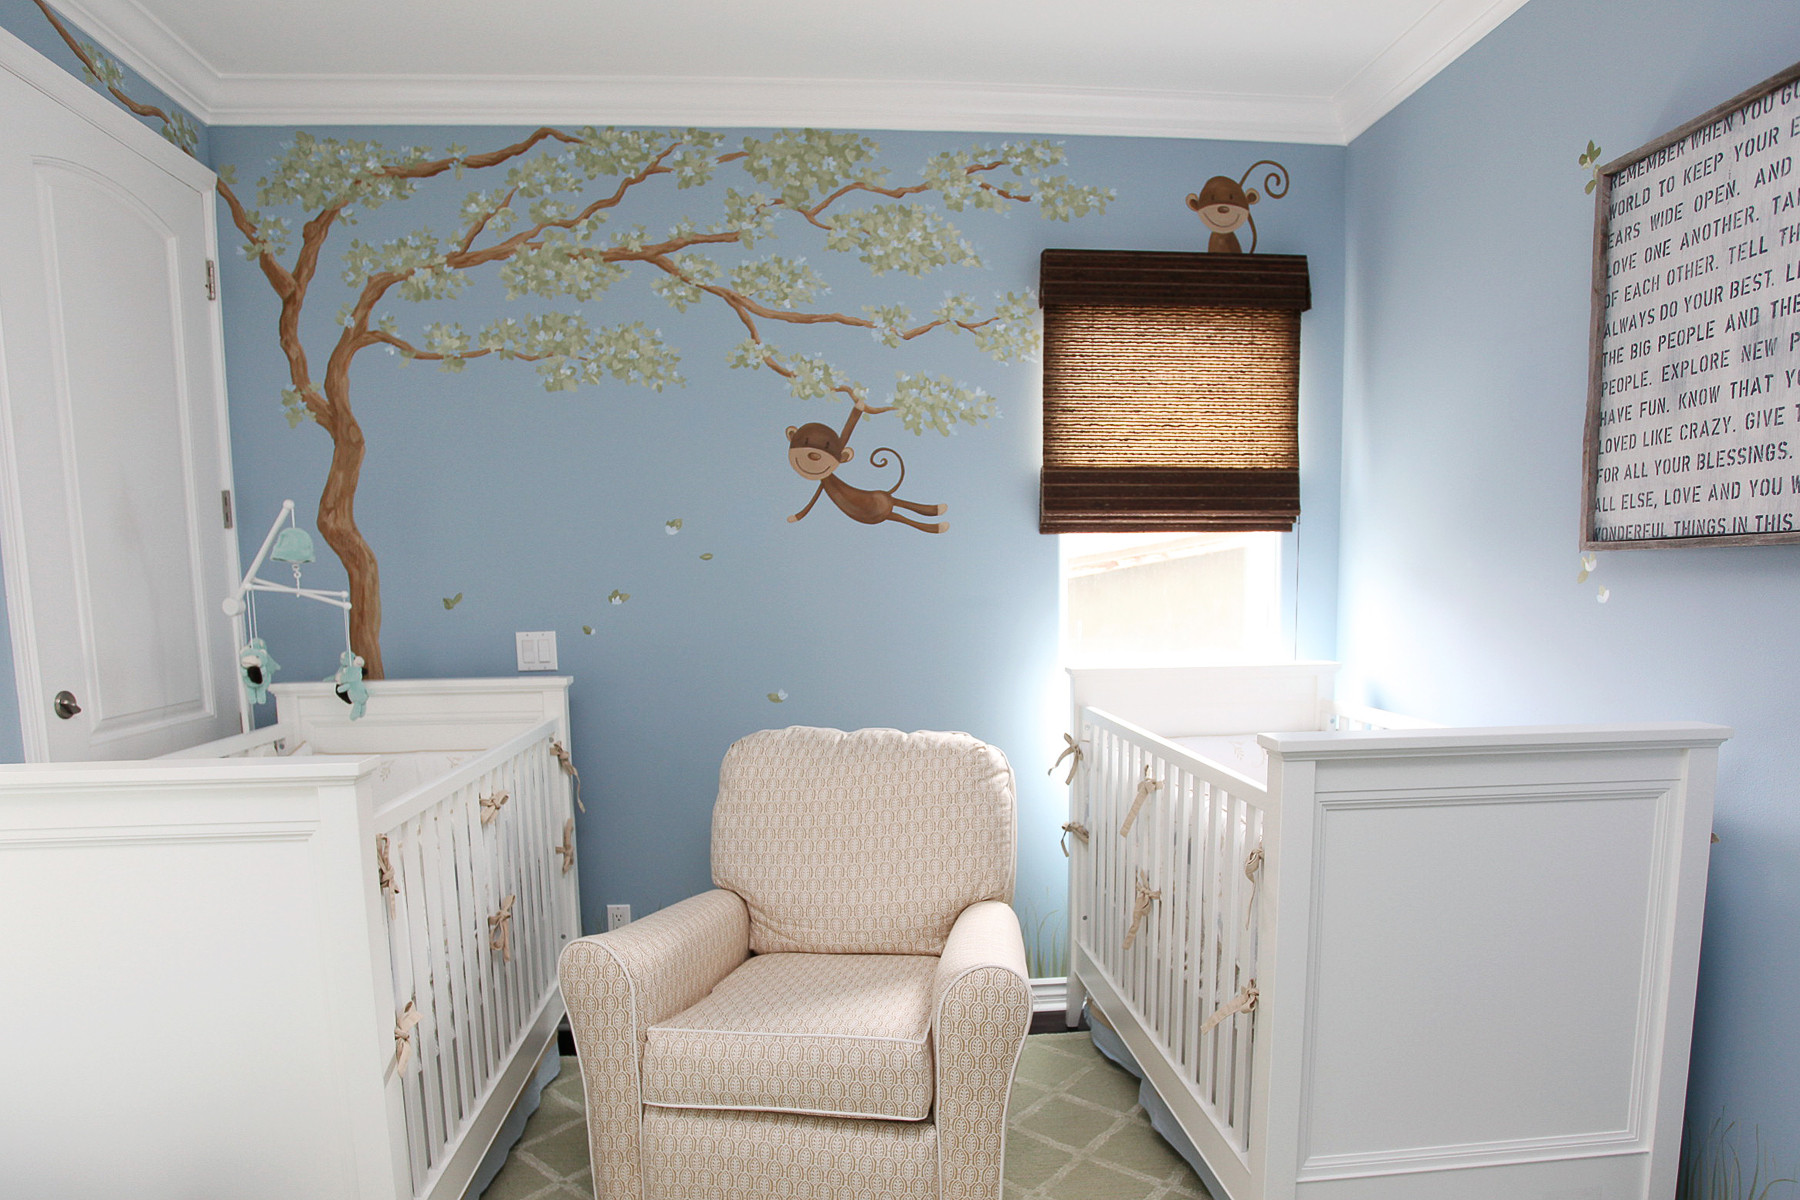 Baby Blue Room Decor
 Designing A Baby’s Room Consider the Following Points